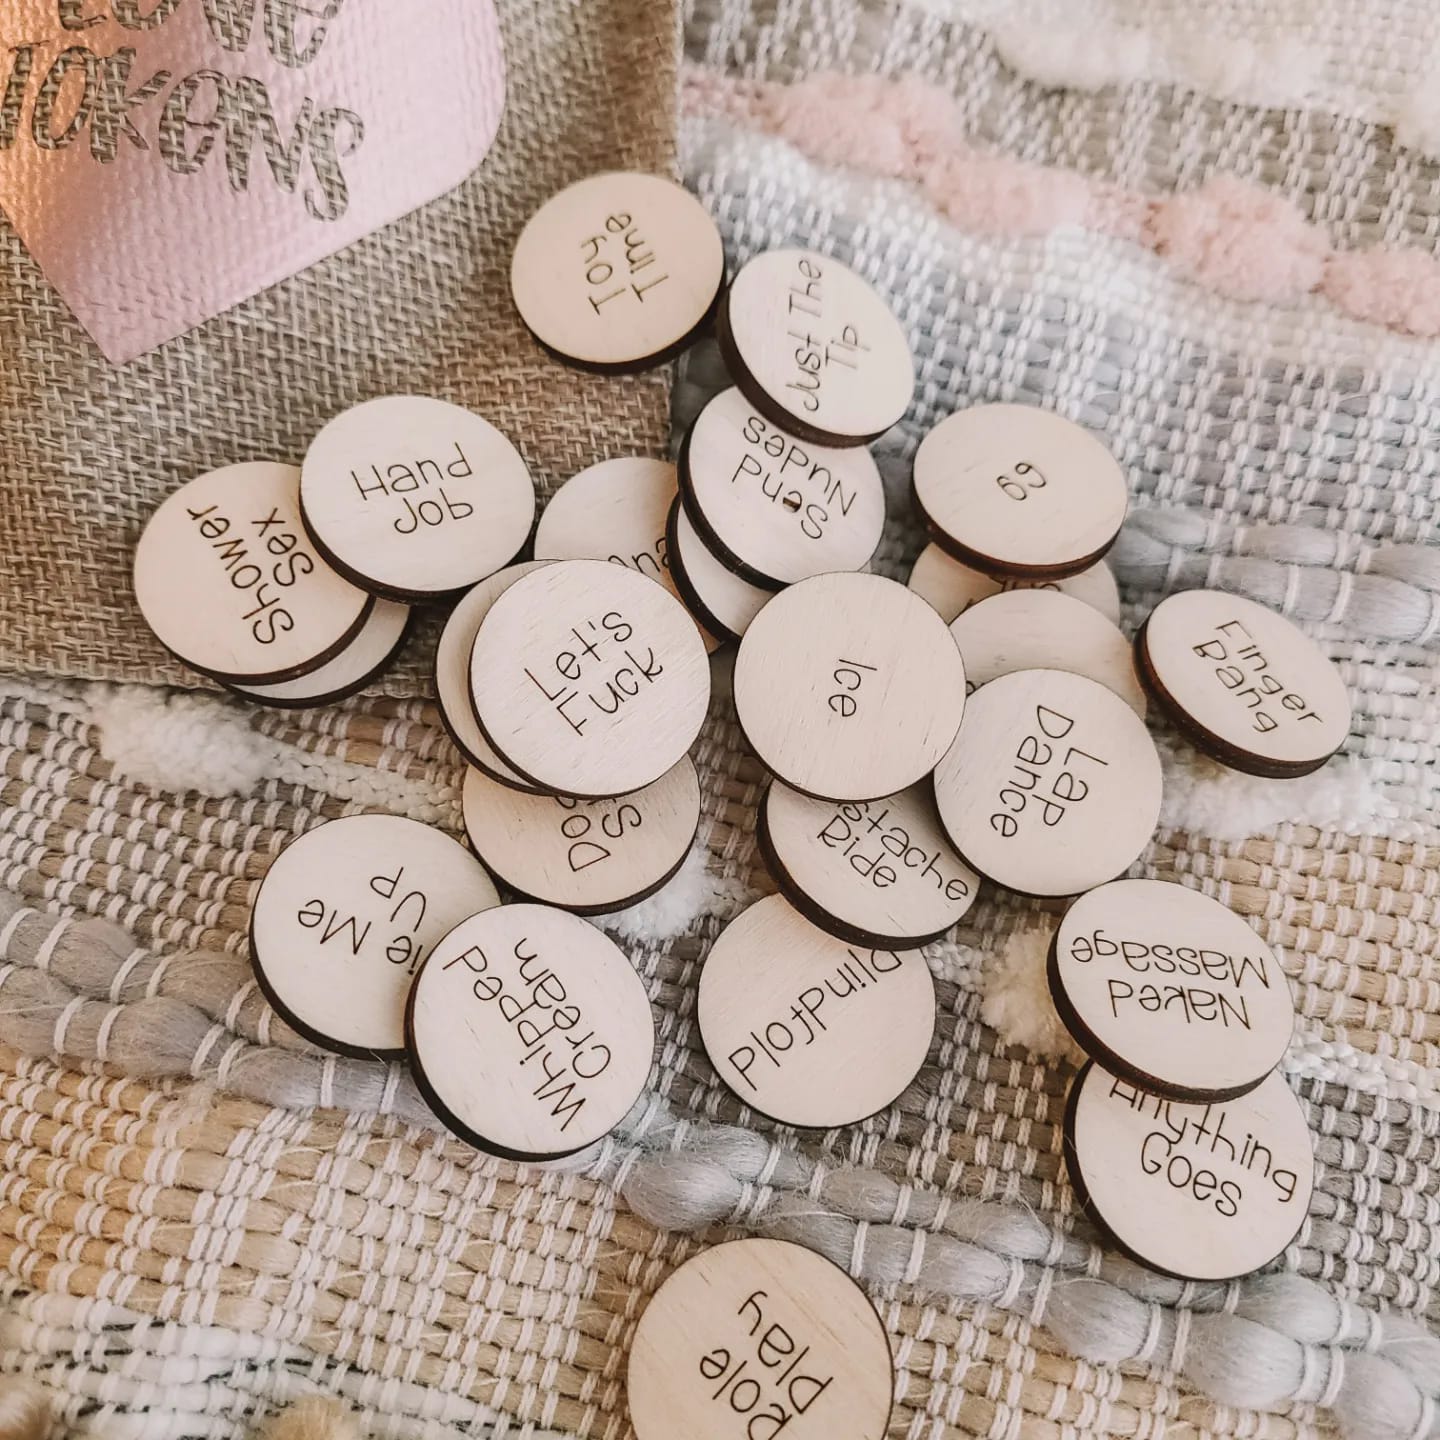 Adult Love Tokens - R-RATED!!!